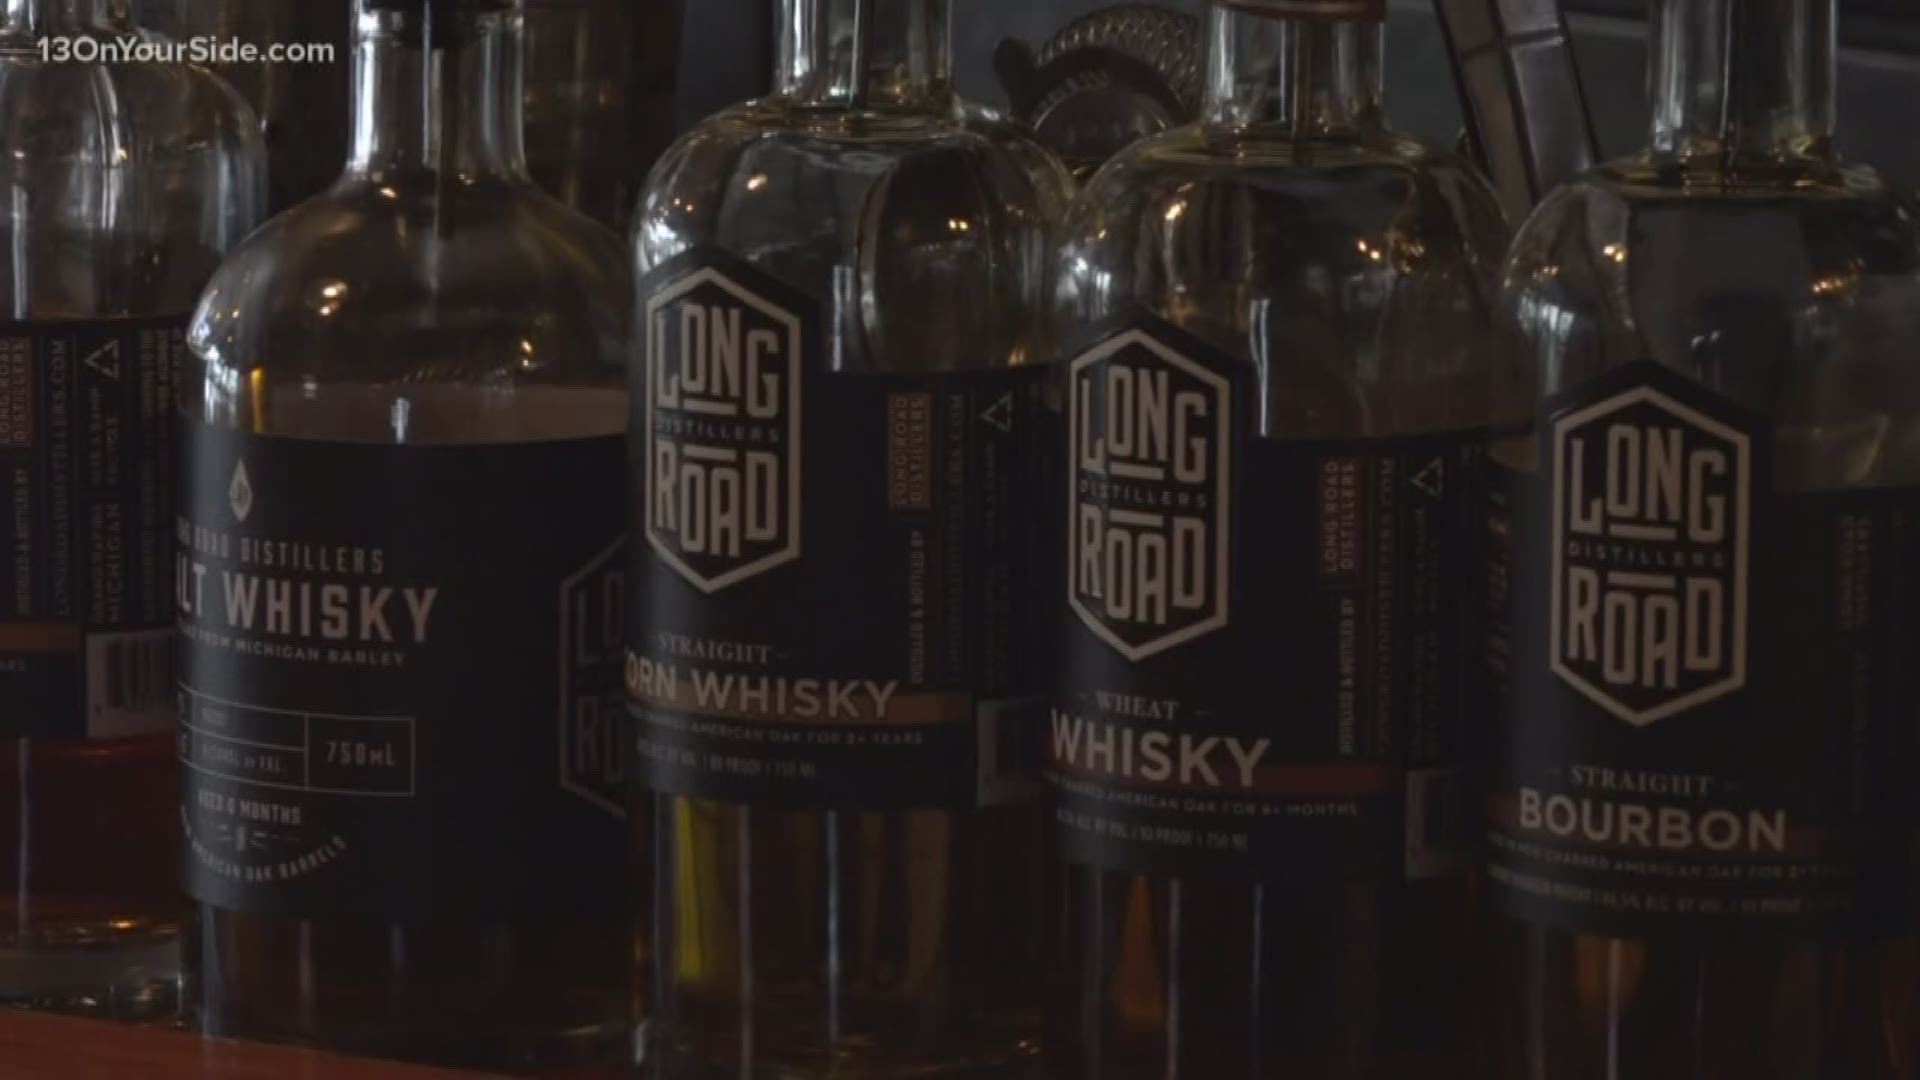 Happy hour will get a little more diverse in Grand Haven, the city's first distillery is officially opening Thursday. Long Road Distillers will open to the public at 18 Washington Ave.